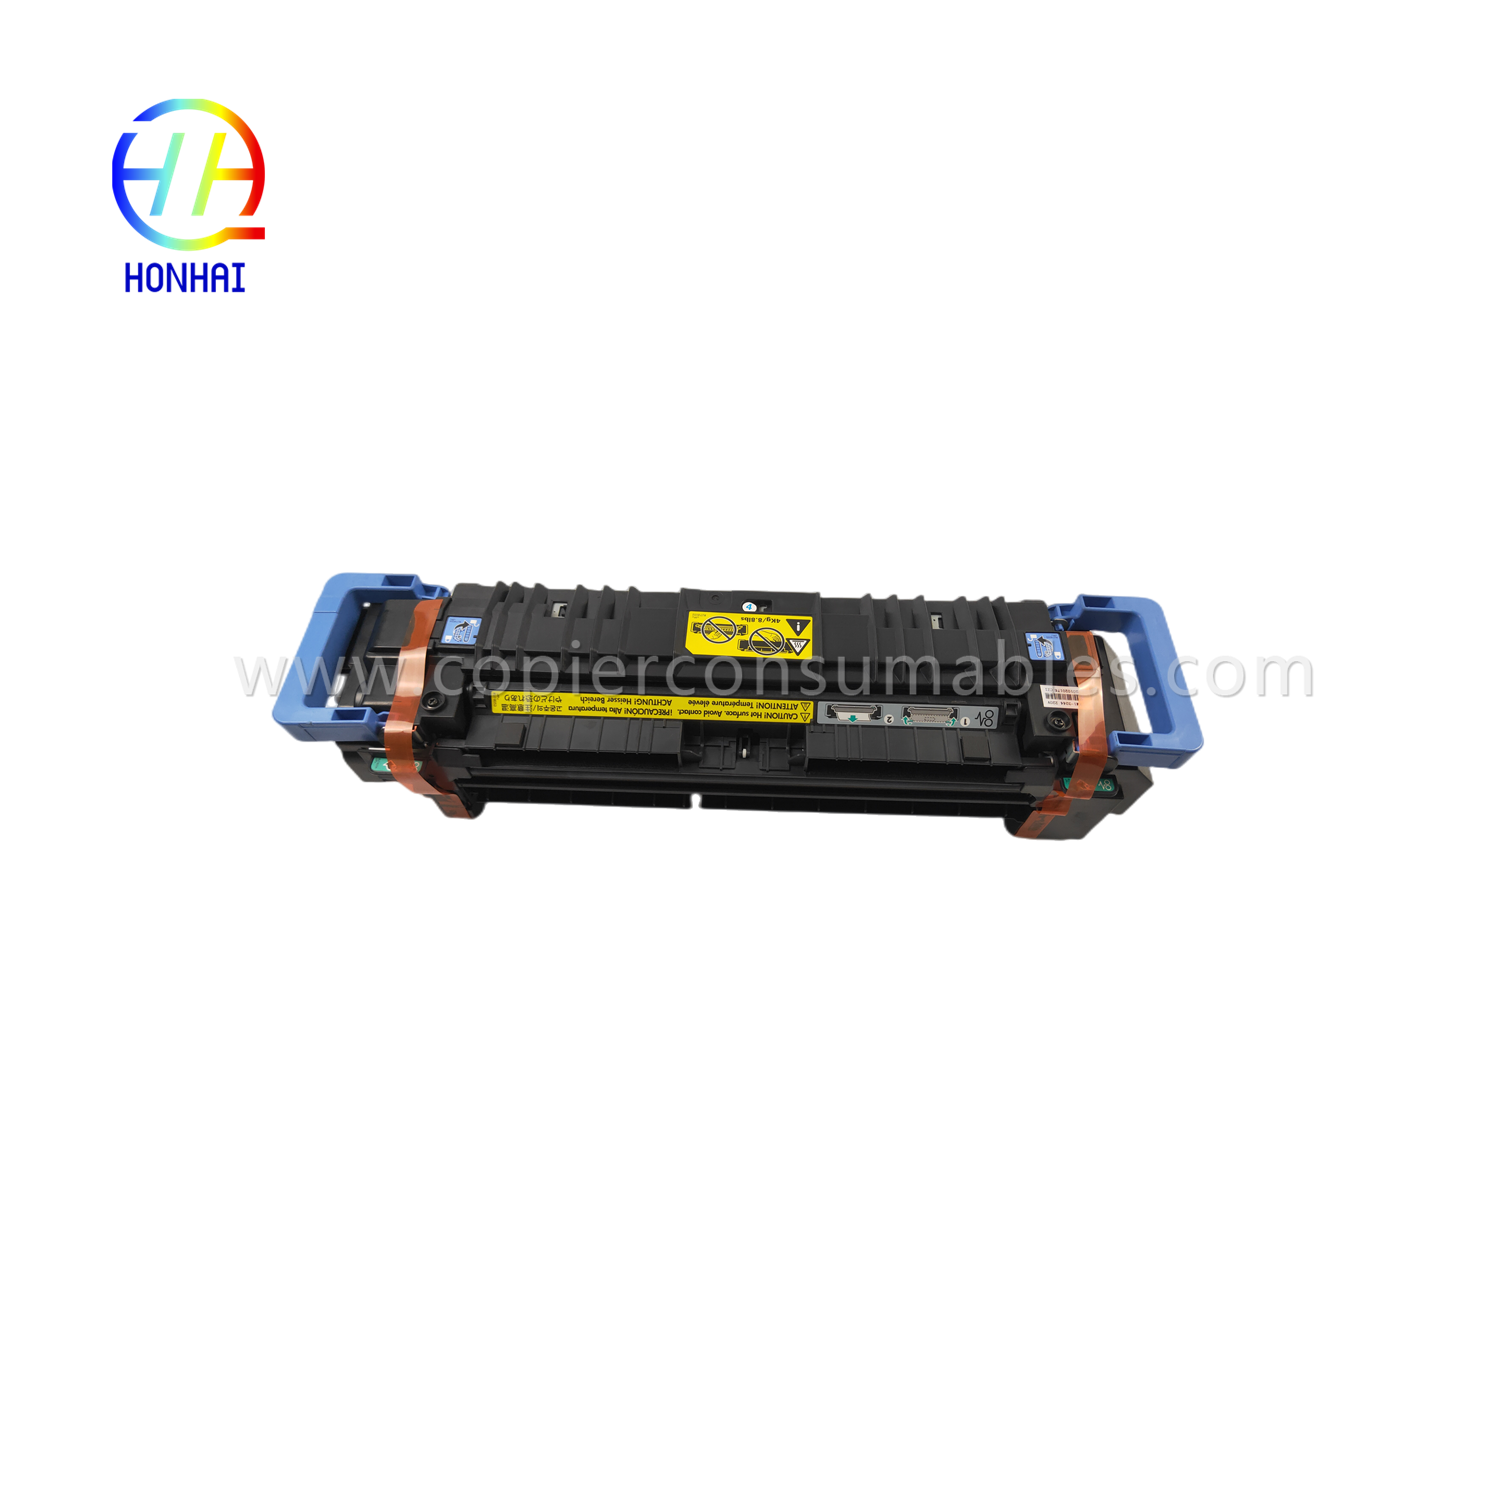 https://c585.goodao.net/fuser-assembly-unit-for-hp-m855-m880-m855dn-m855xh-m880z-m880z-c1n54-67901-c1n58-67901-fusing-heating-fixing-assy-product/